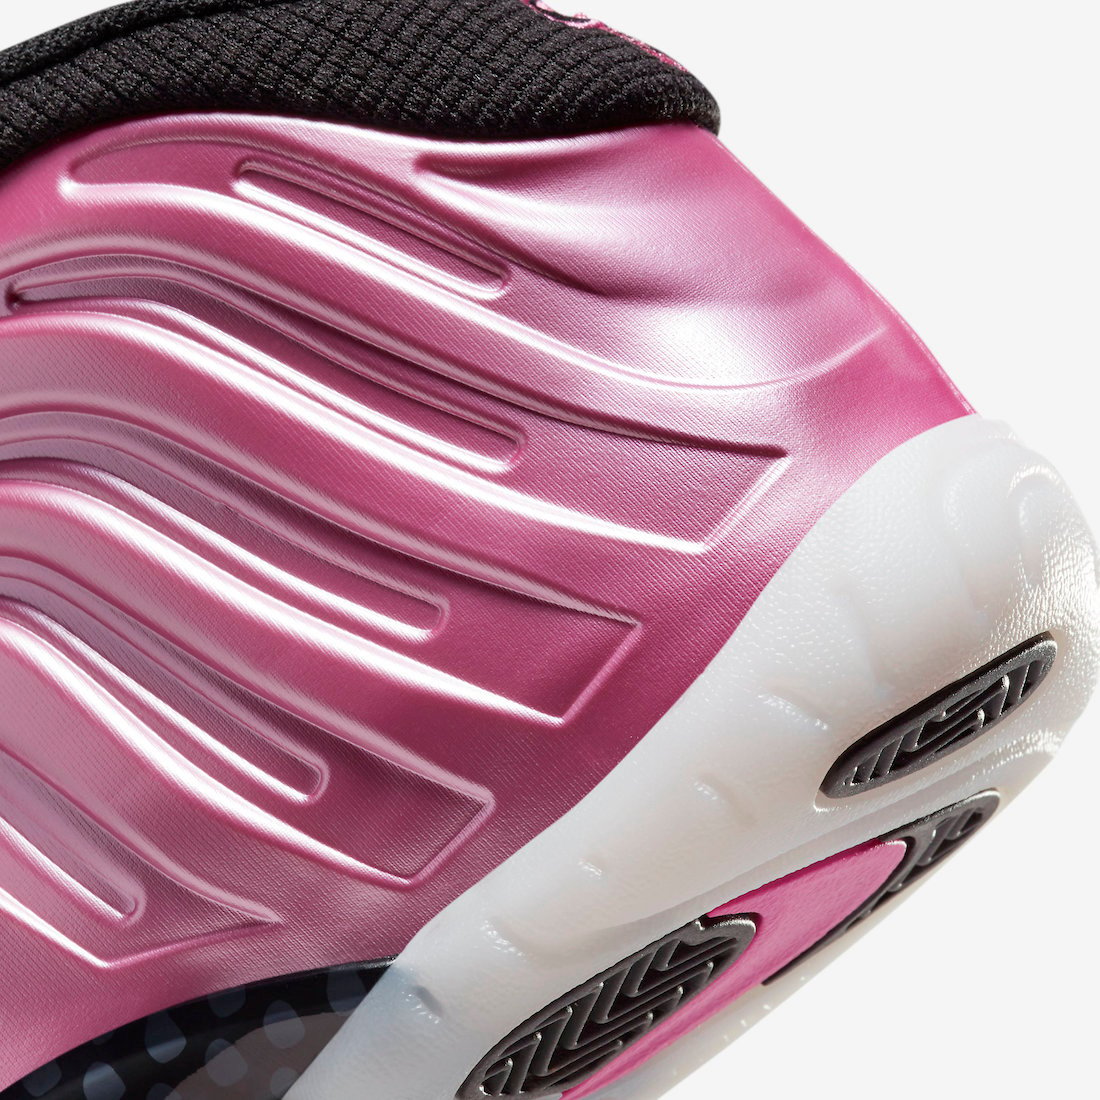 Nike Little Posite One Polarized Pink DX1947-600 Release Date Info